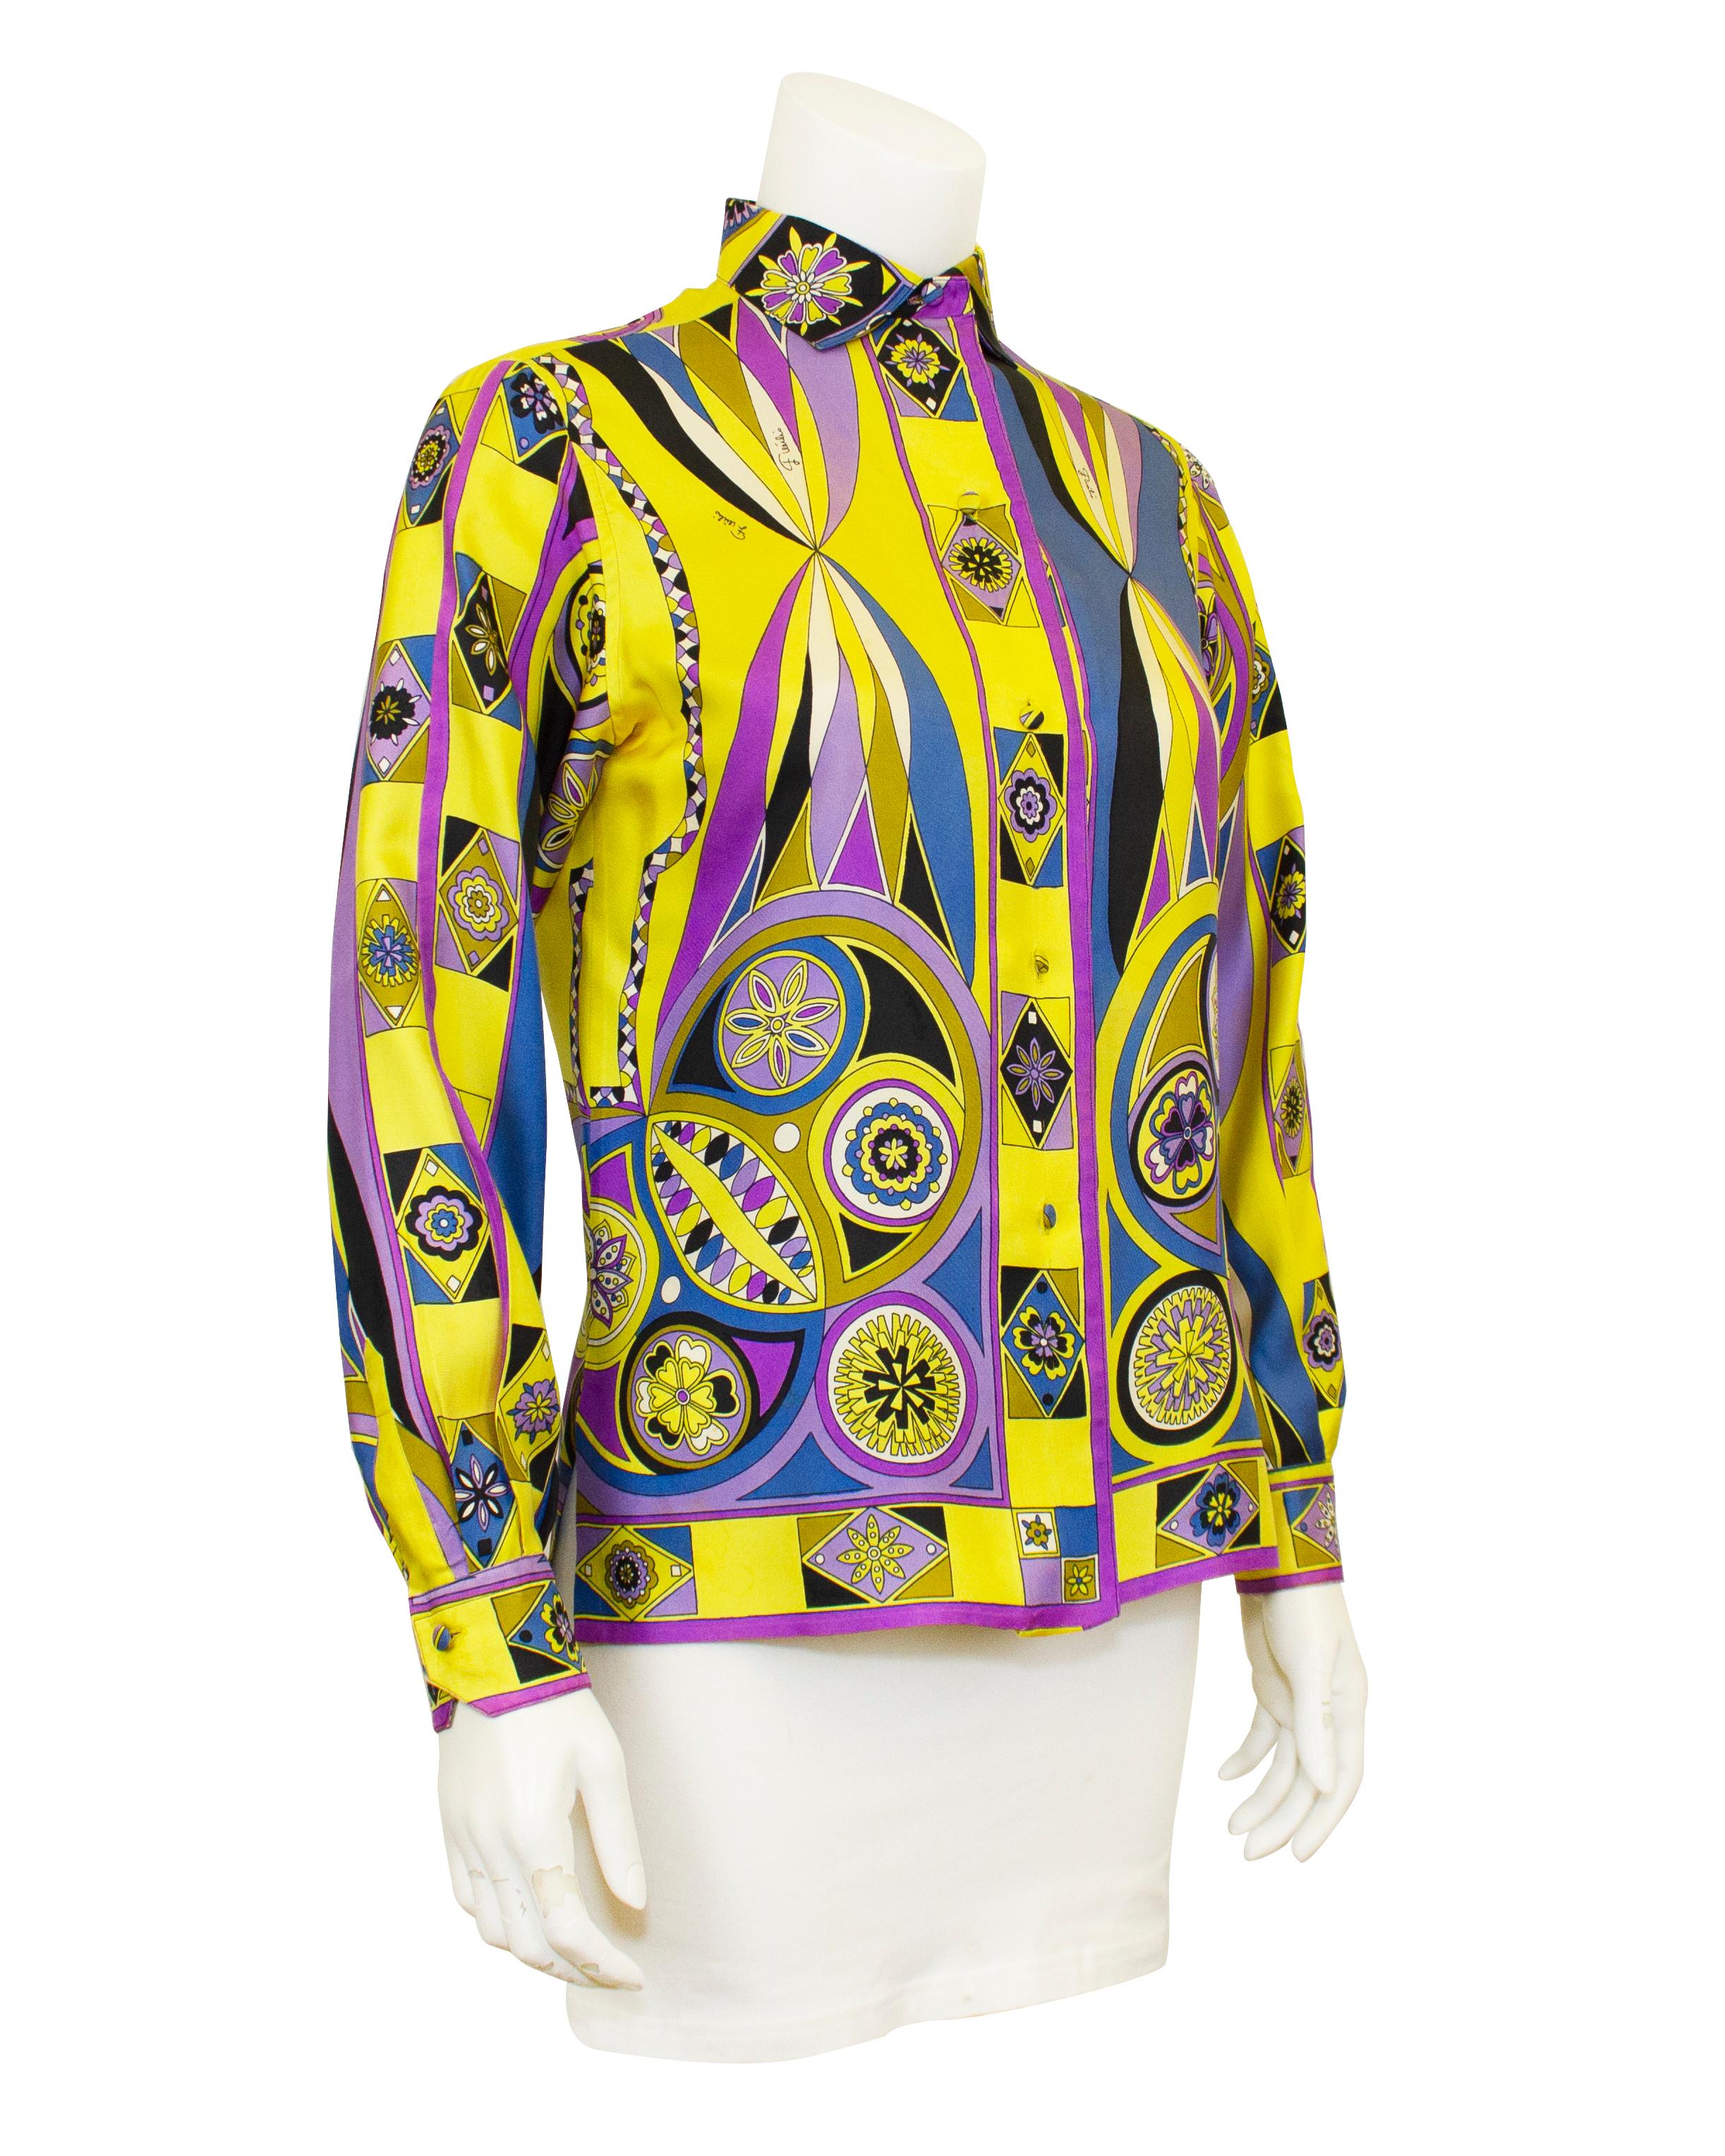 Vibrant printed Emilio Pucci silk shirt from the 1970s. Iconic Pucci abstract geometric and floral print in bright yellow, purple, blue and black. The upper back features a large butterfly. Fabric covered buttons and signed fabric. Classic Italian